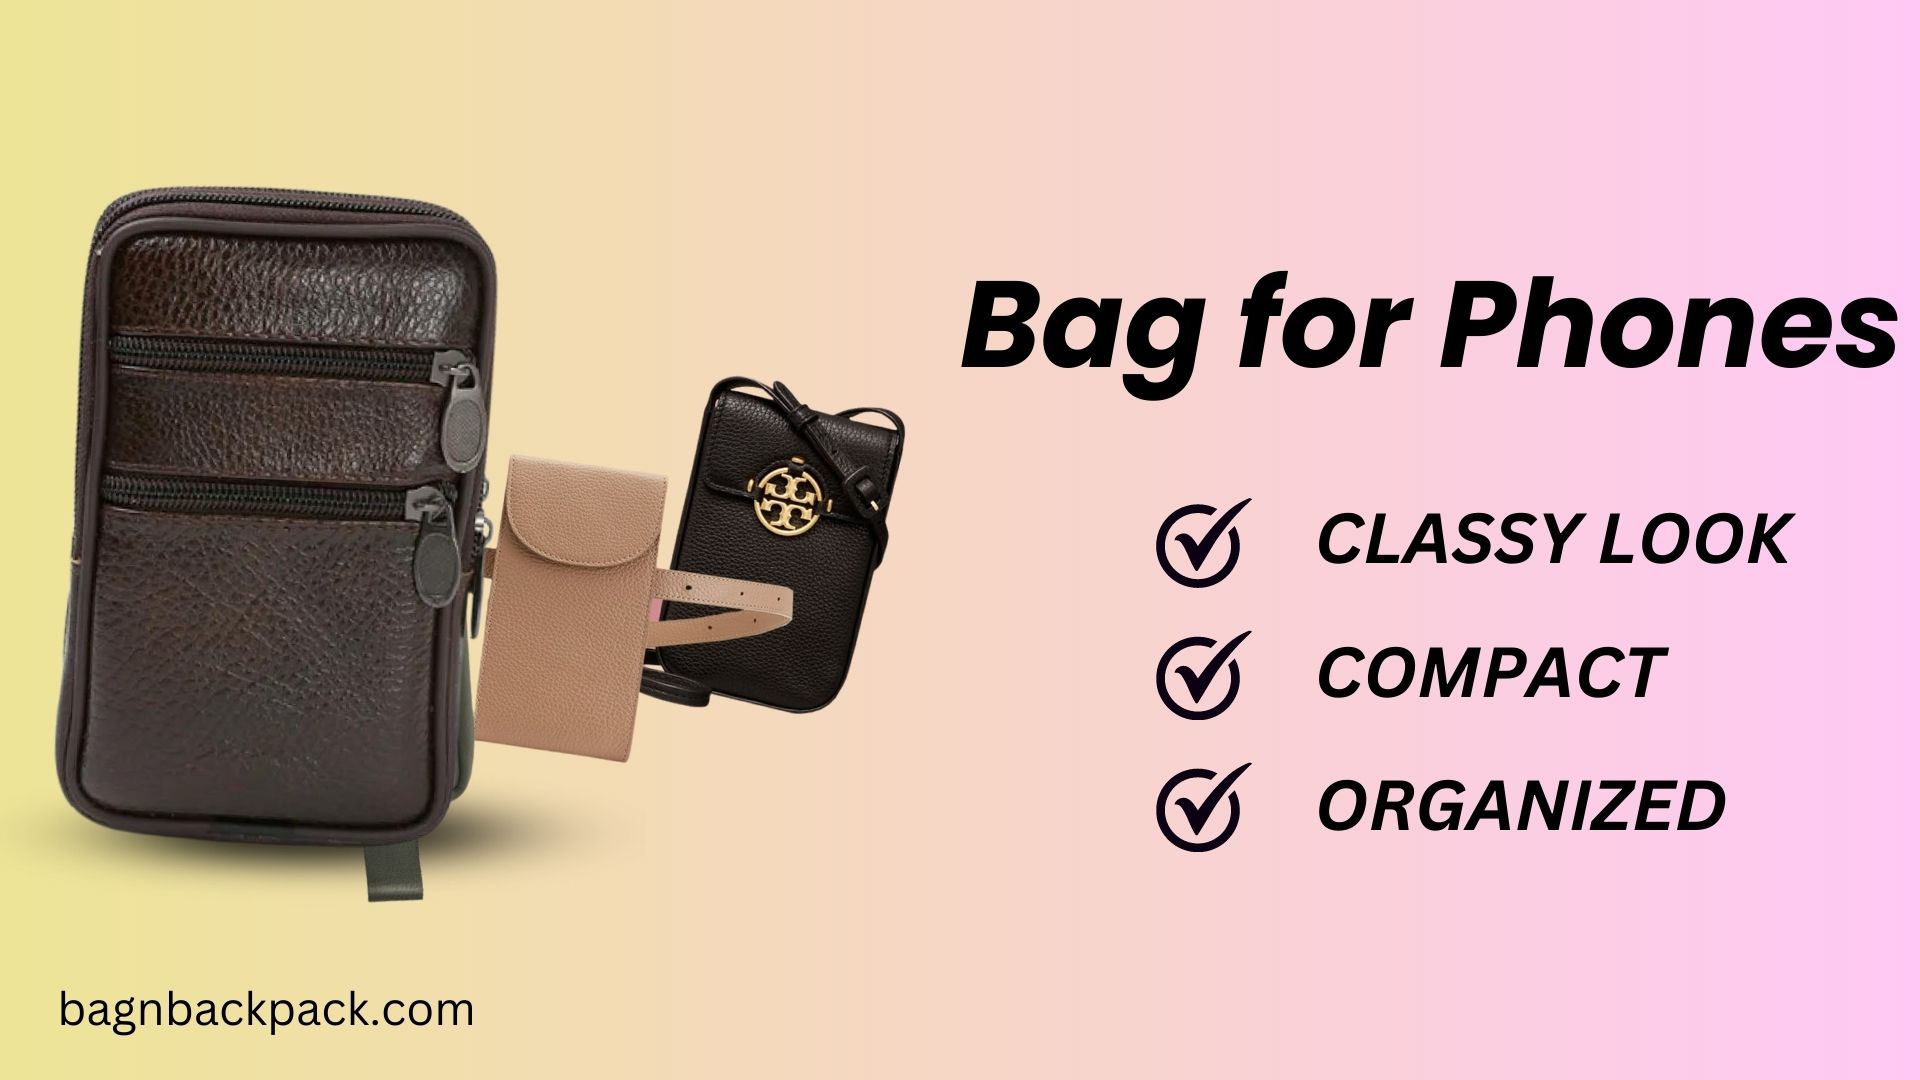 Bag for phones